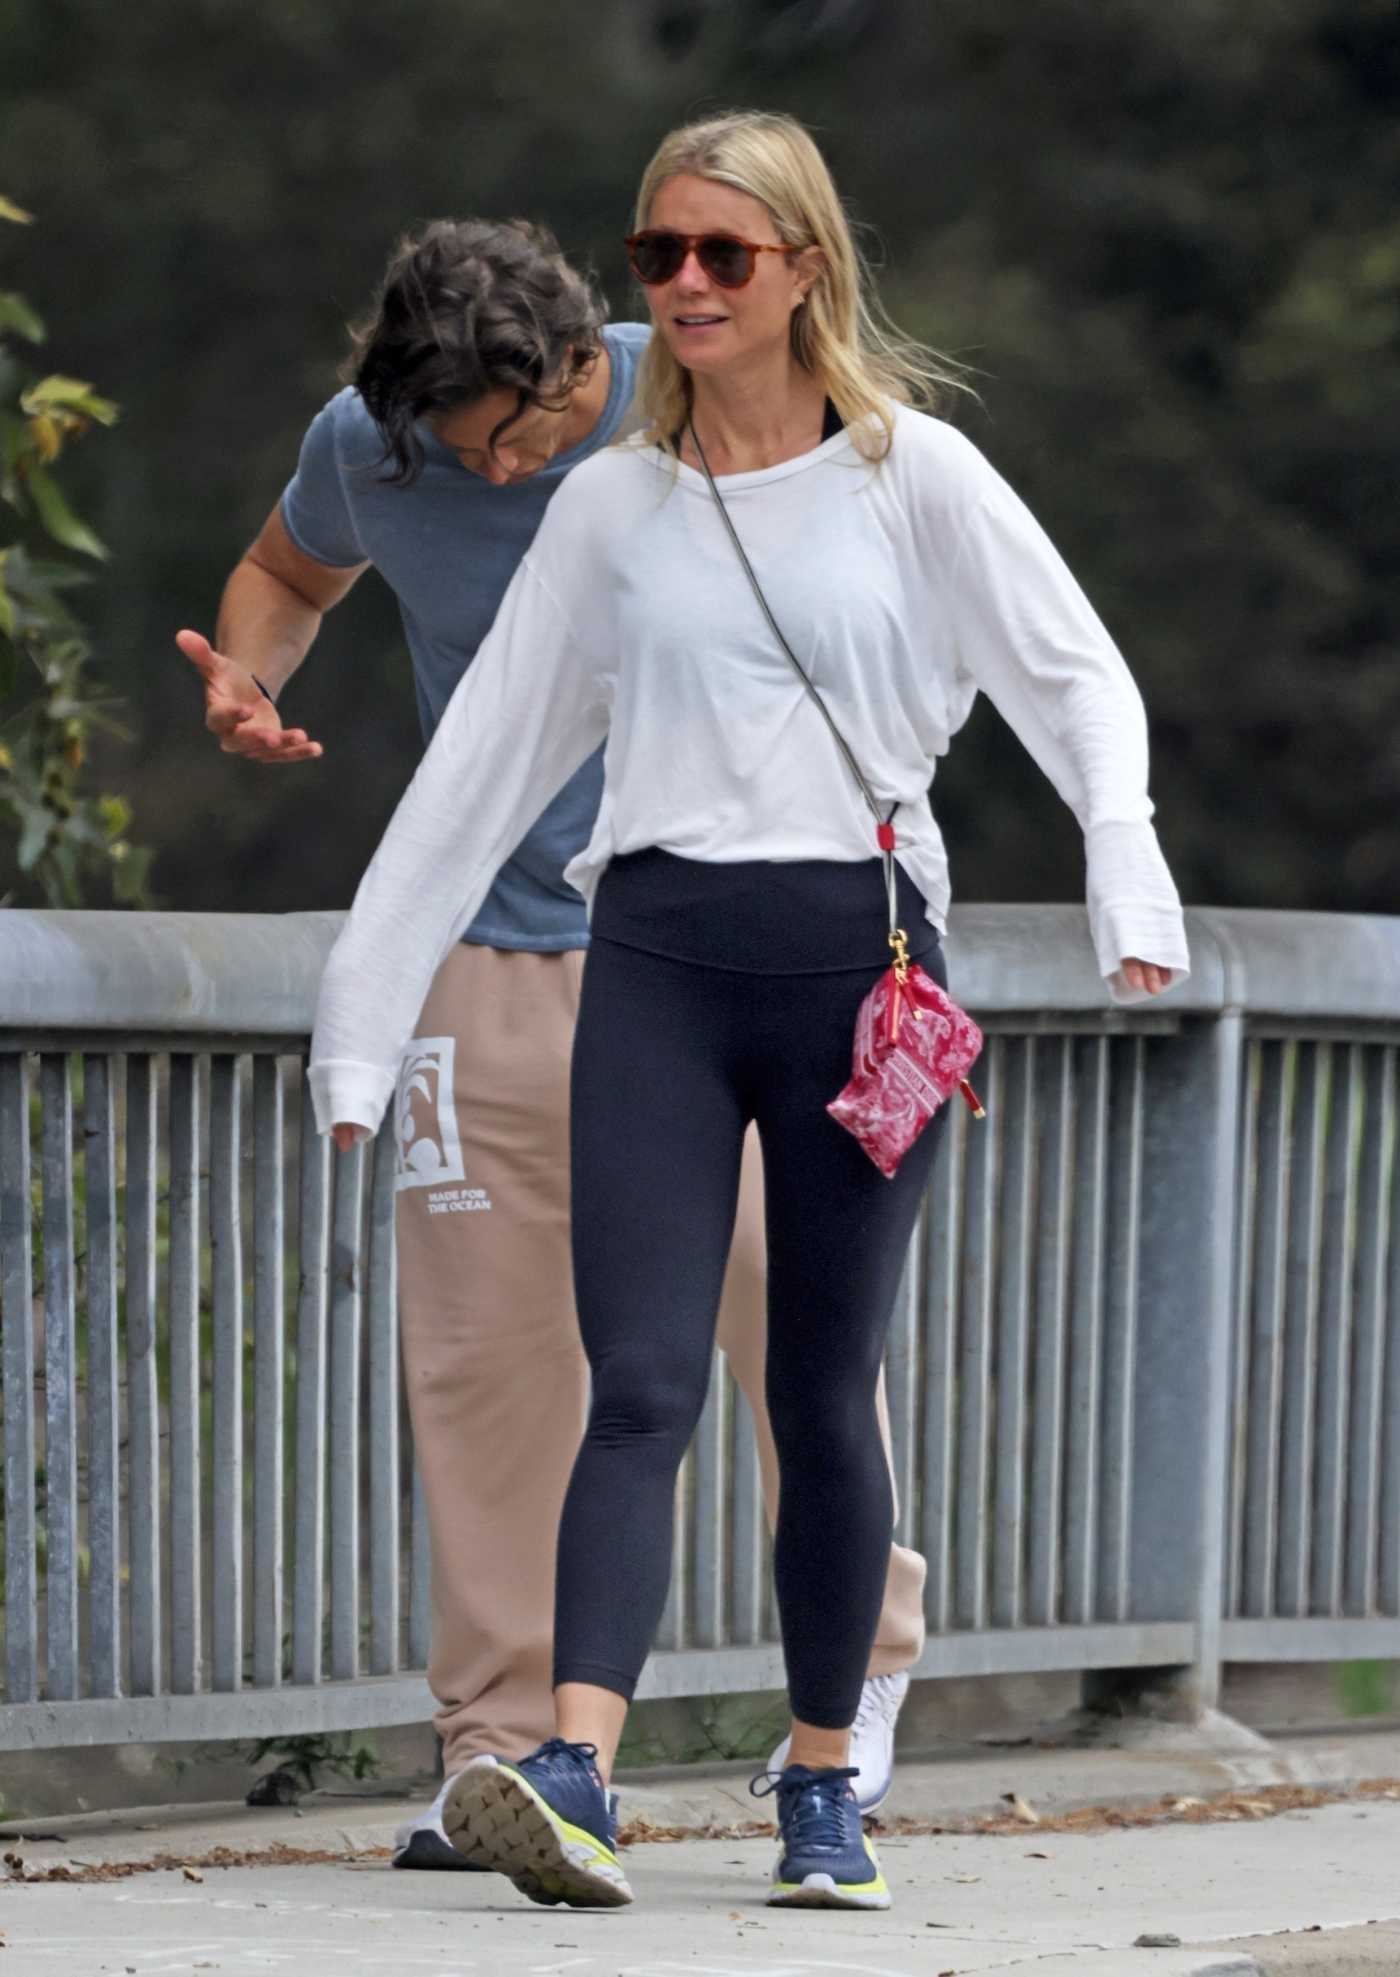 Gwyneth Paltrow in a Black Leggings Was Seen Out with Brad Falchuk and a Friend in Montecito 06/19/2021